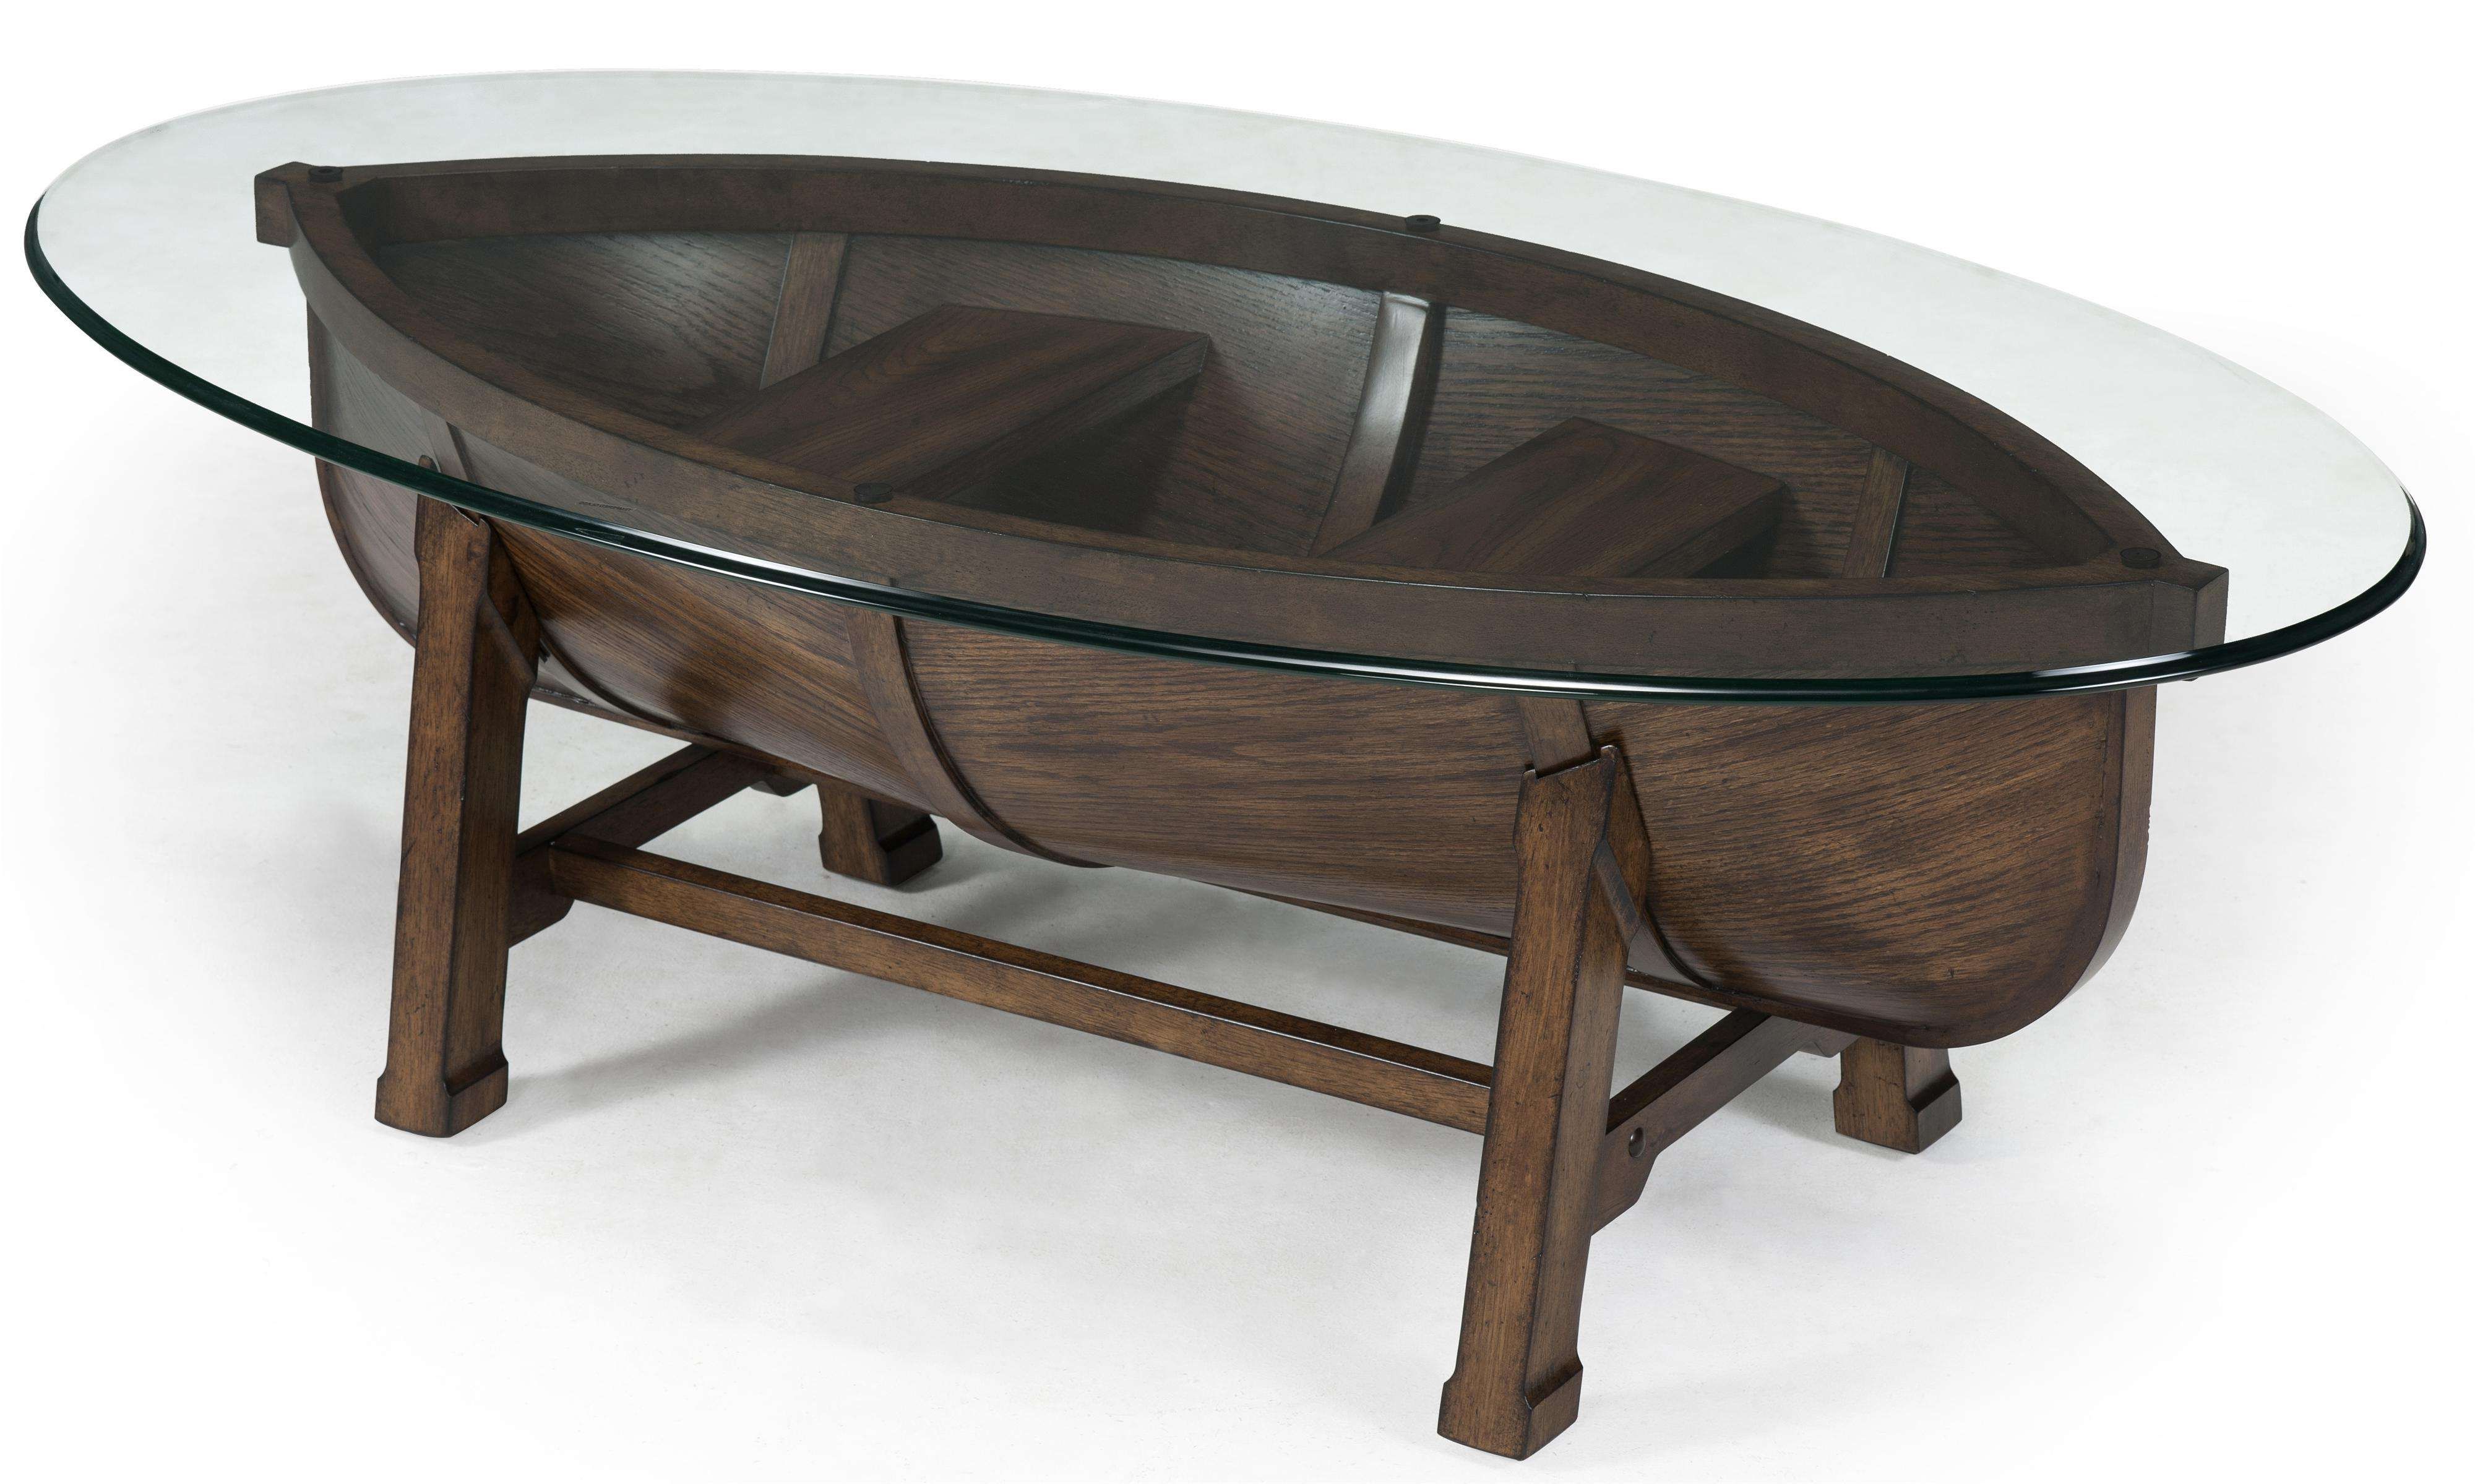 Natural Design Of The Oval Shaped Glas Coffe Table That Has High Pertaining To Trendy Coffee Tables With Oval Shape (View 16 of 20)